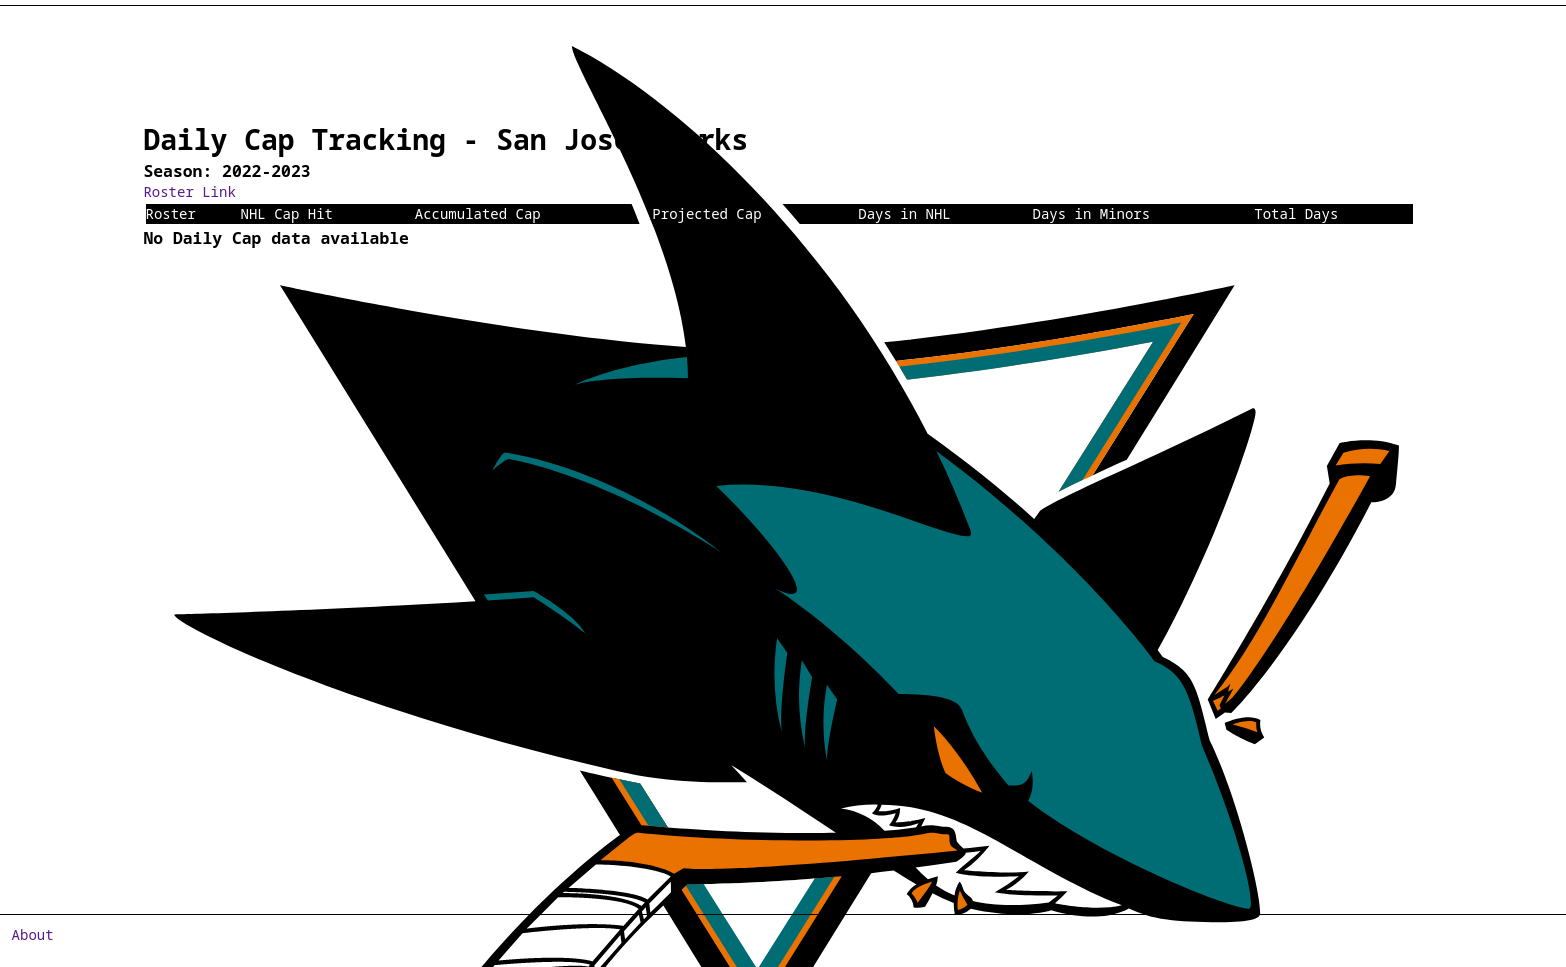 an image of the Sharks' daily cap tracking page with a hilariously huge misplacedsharks logo